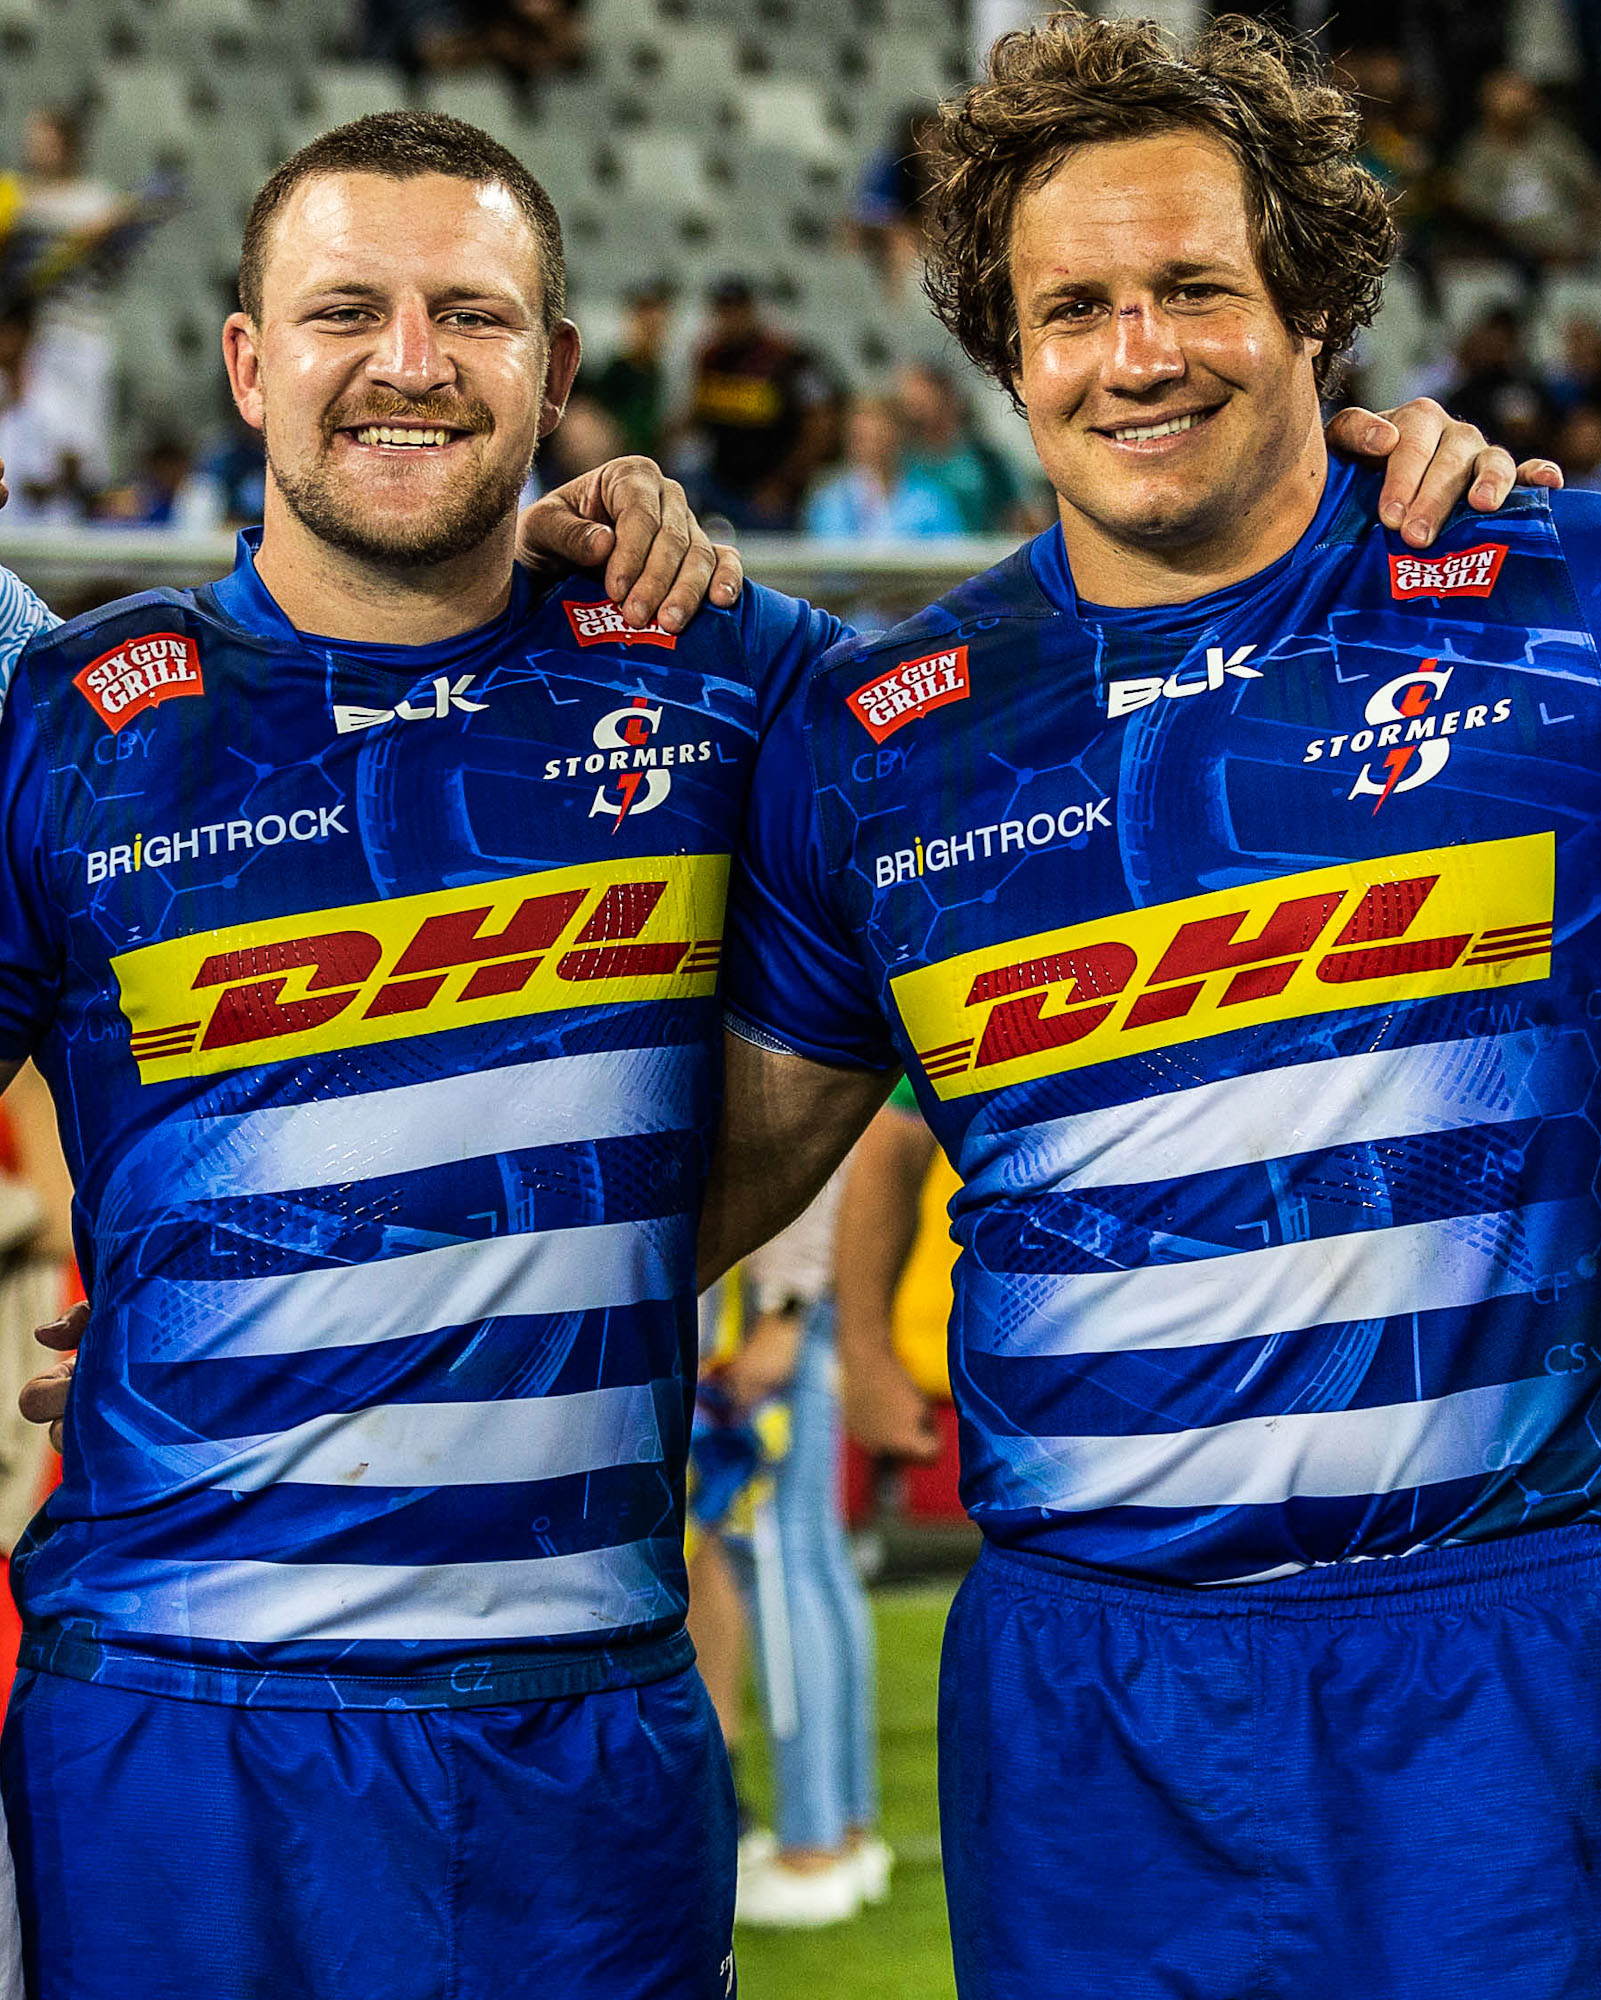 Andre-Hugo Venter and Neethling Fouche.